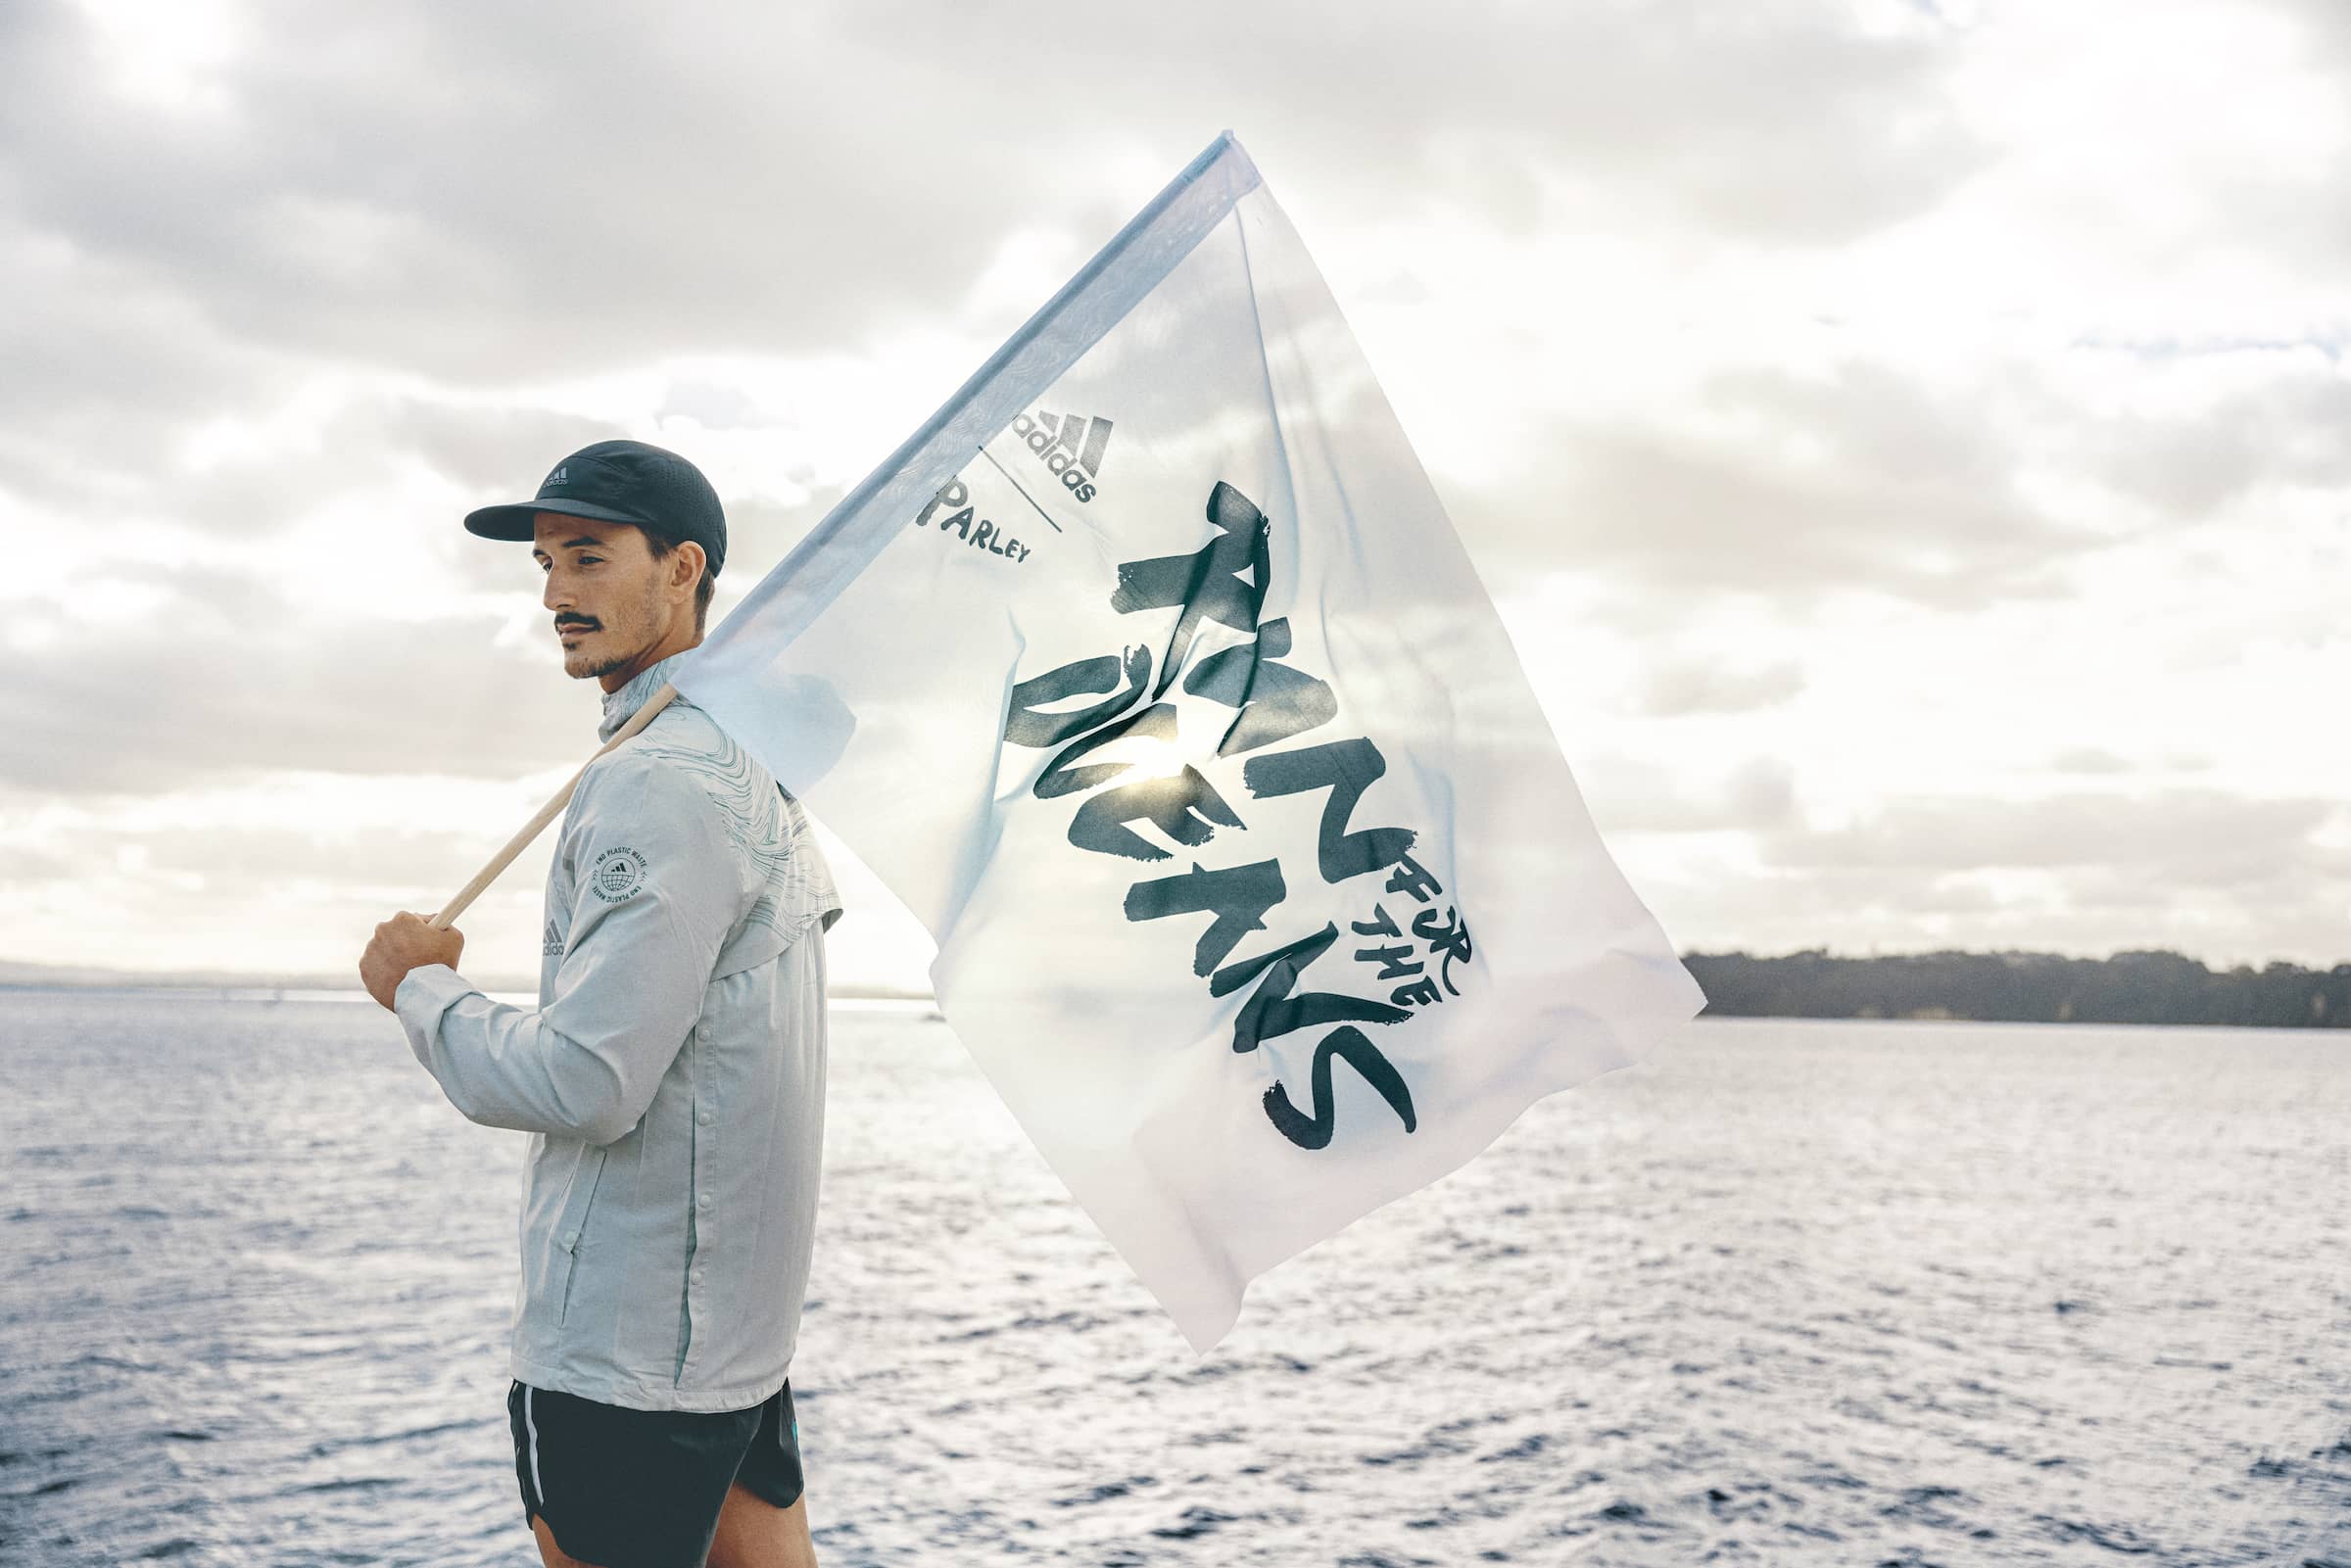 adidas And Parley For The Oceans Unite Sporting Communities Across The Globe To Run For The Oceans